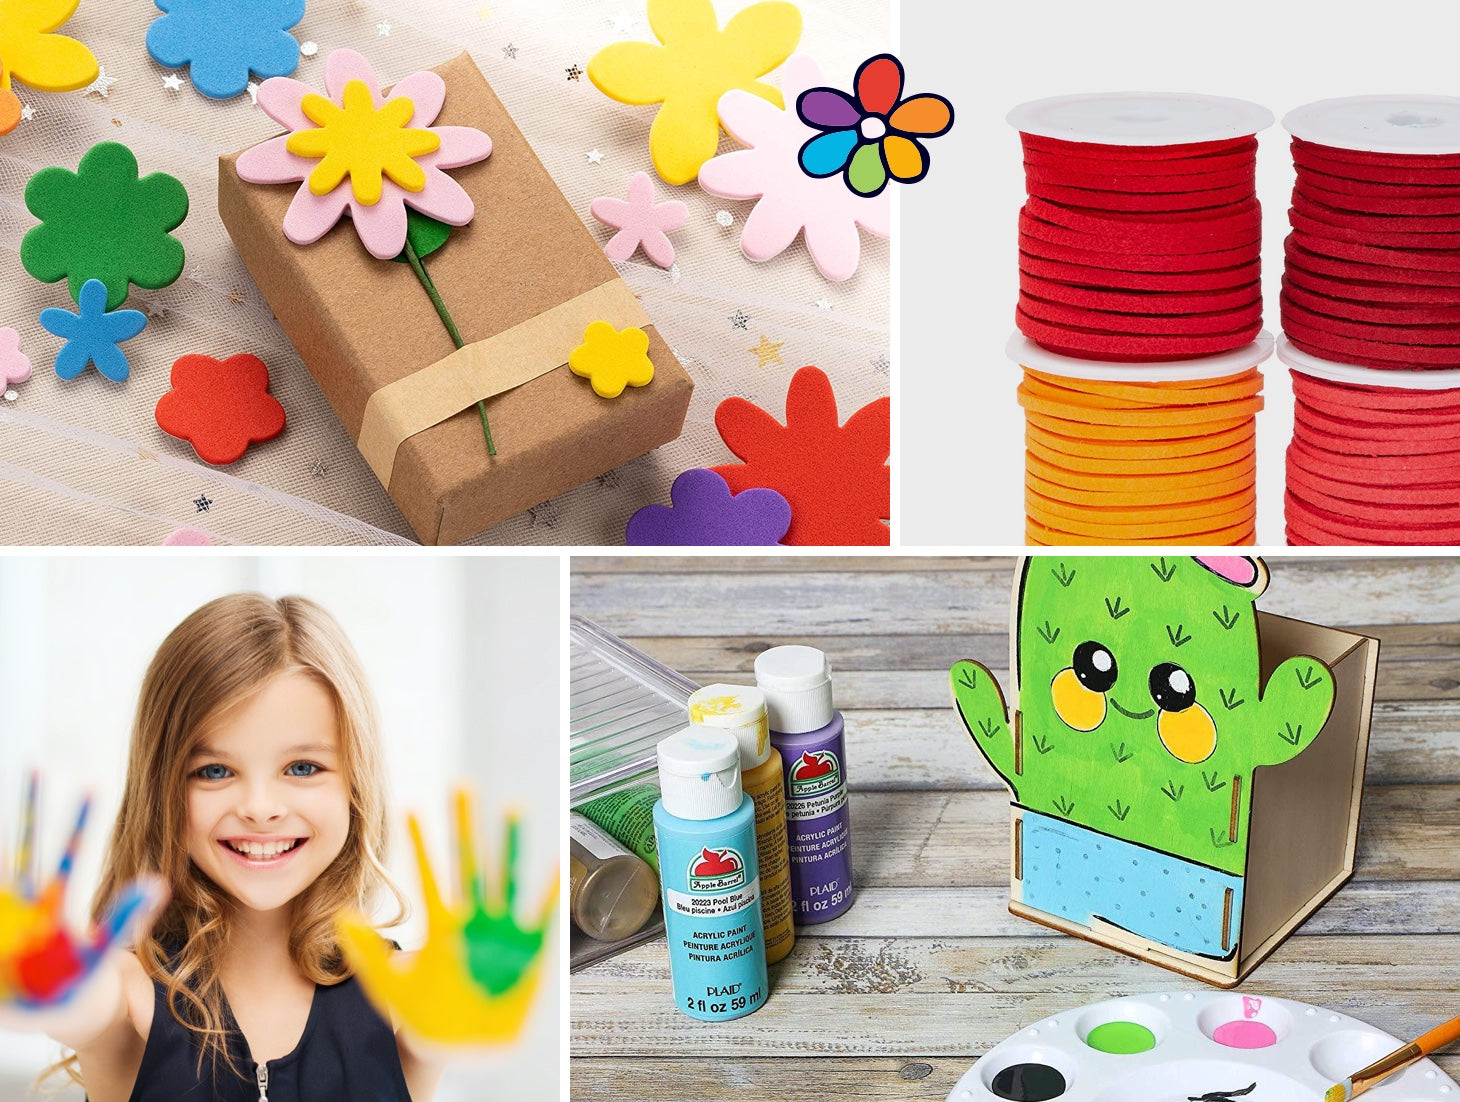 Free Craft Samples - Creatively Crafting